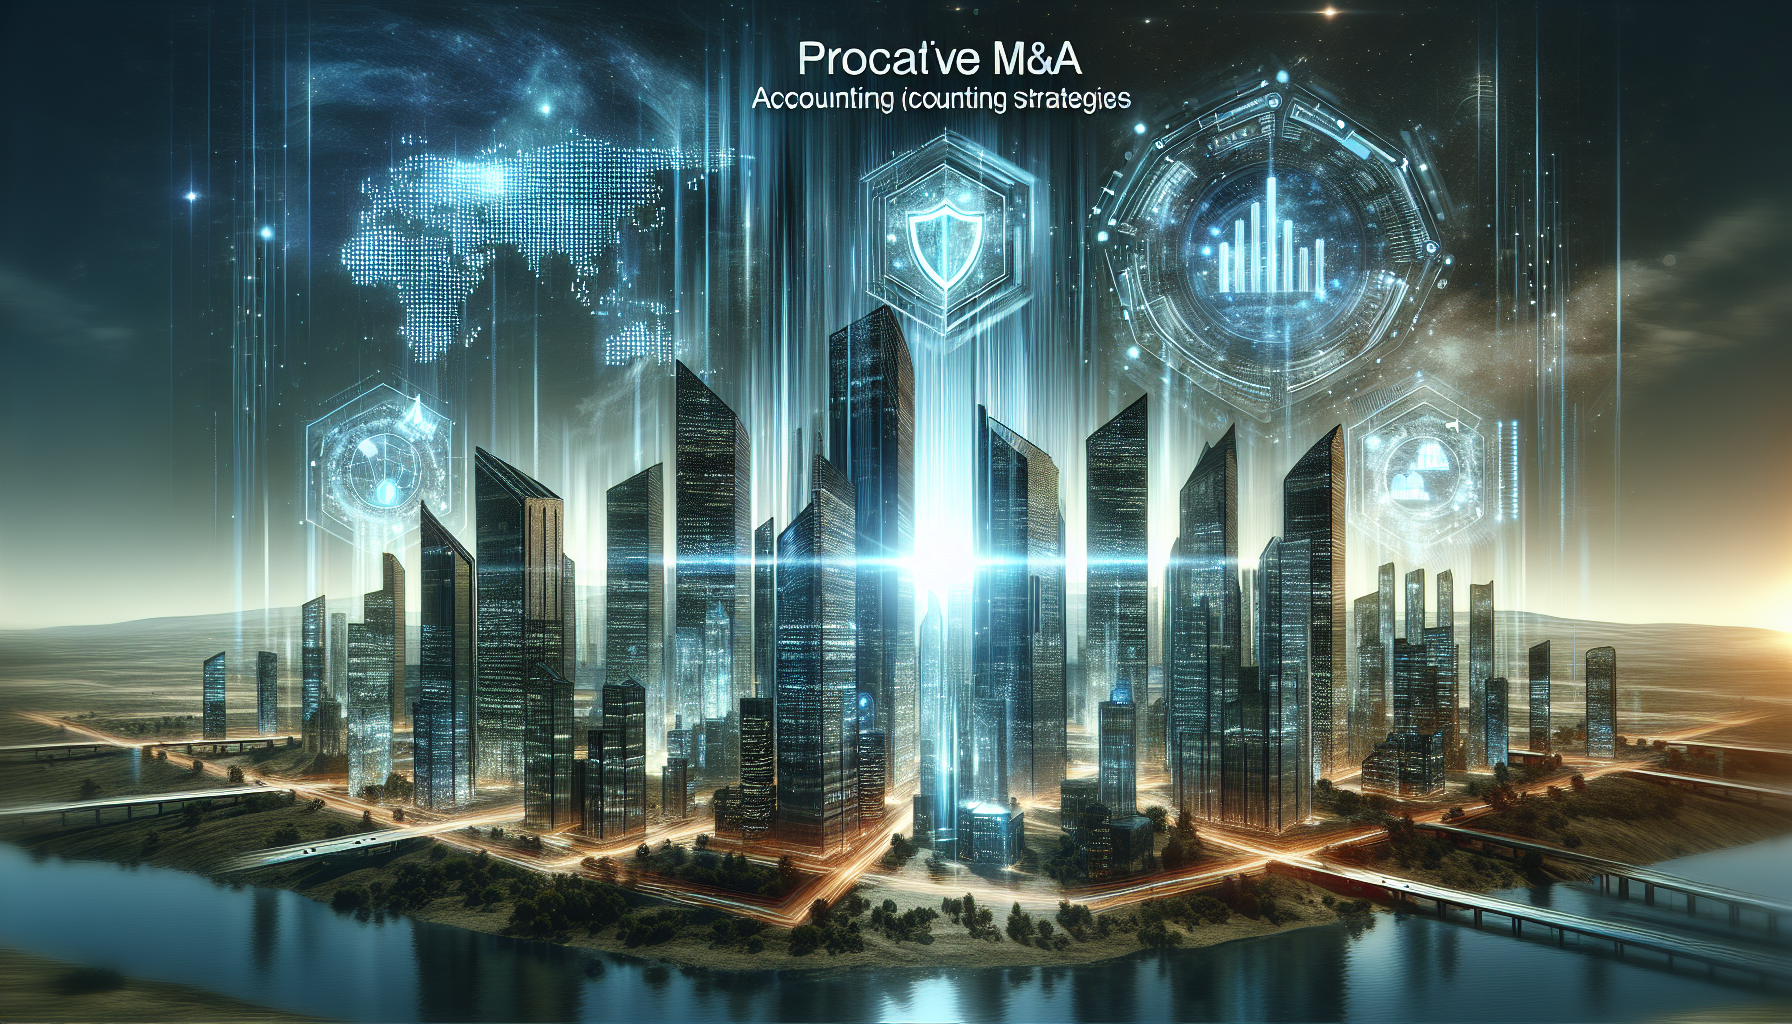 Illustration of proactive M&A accounting